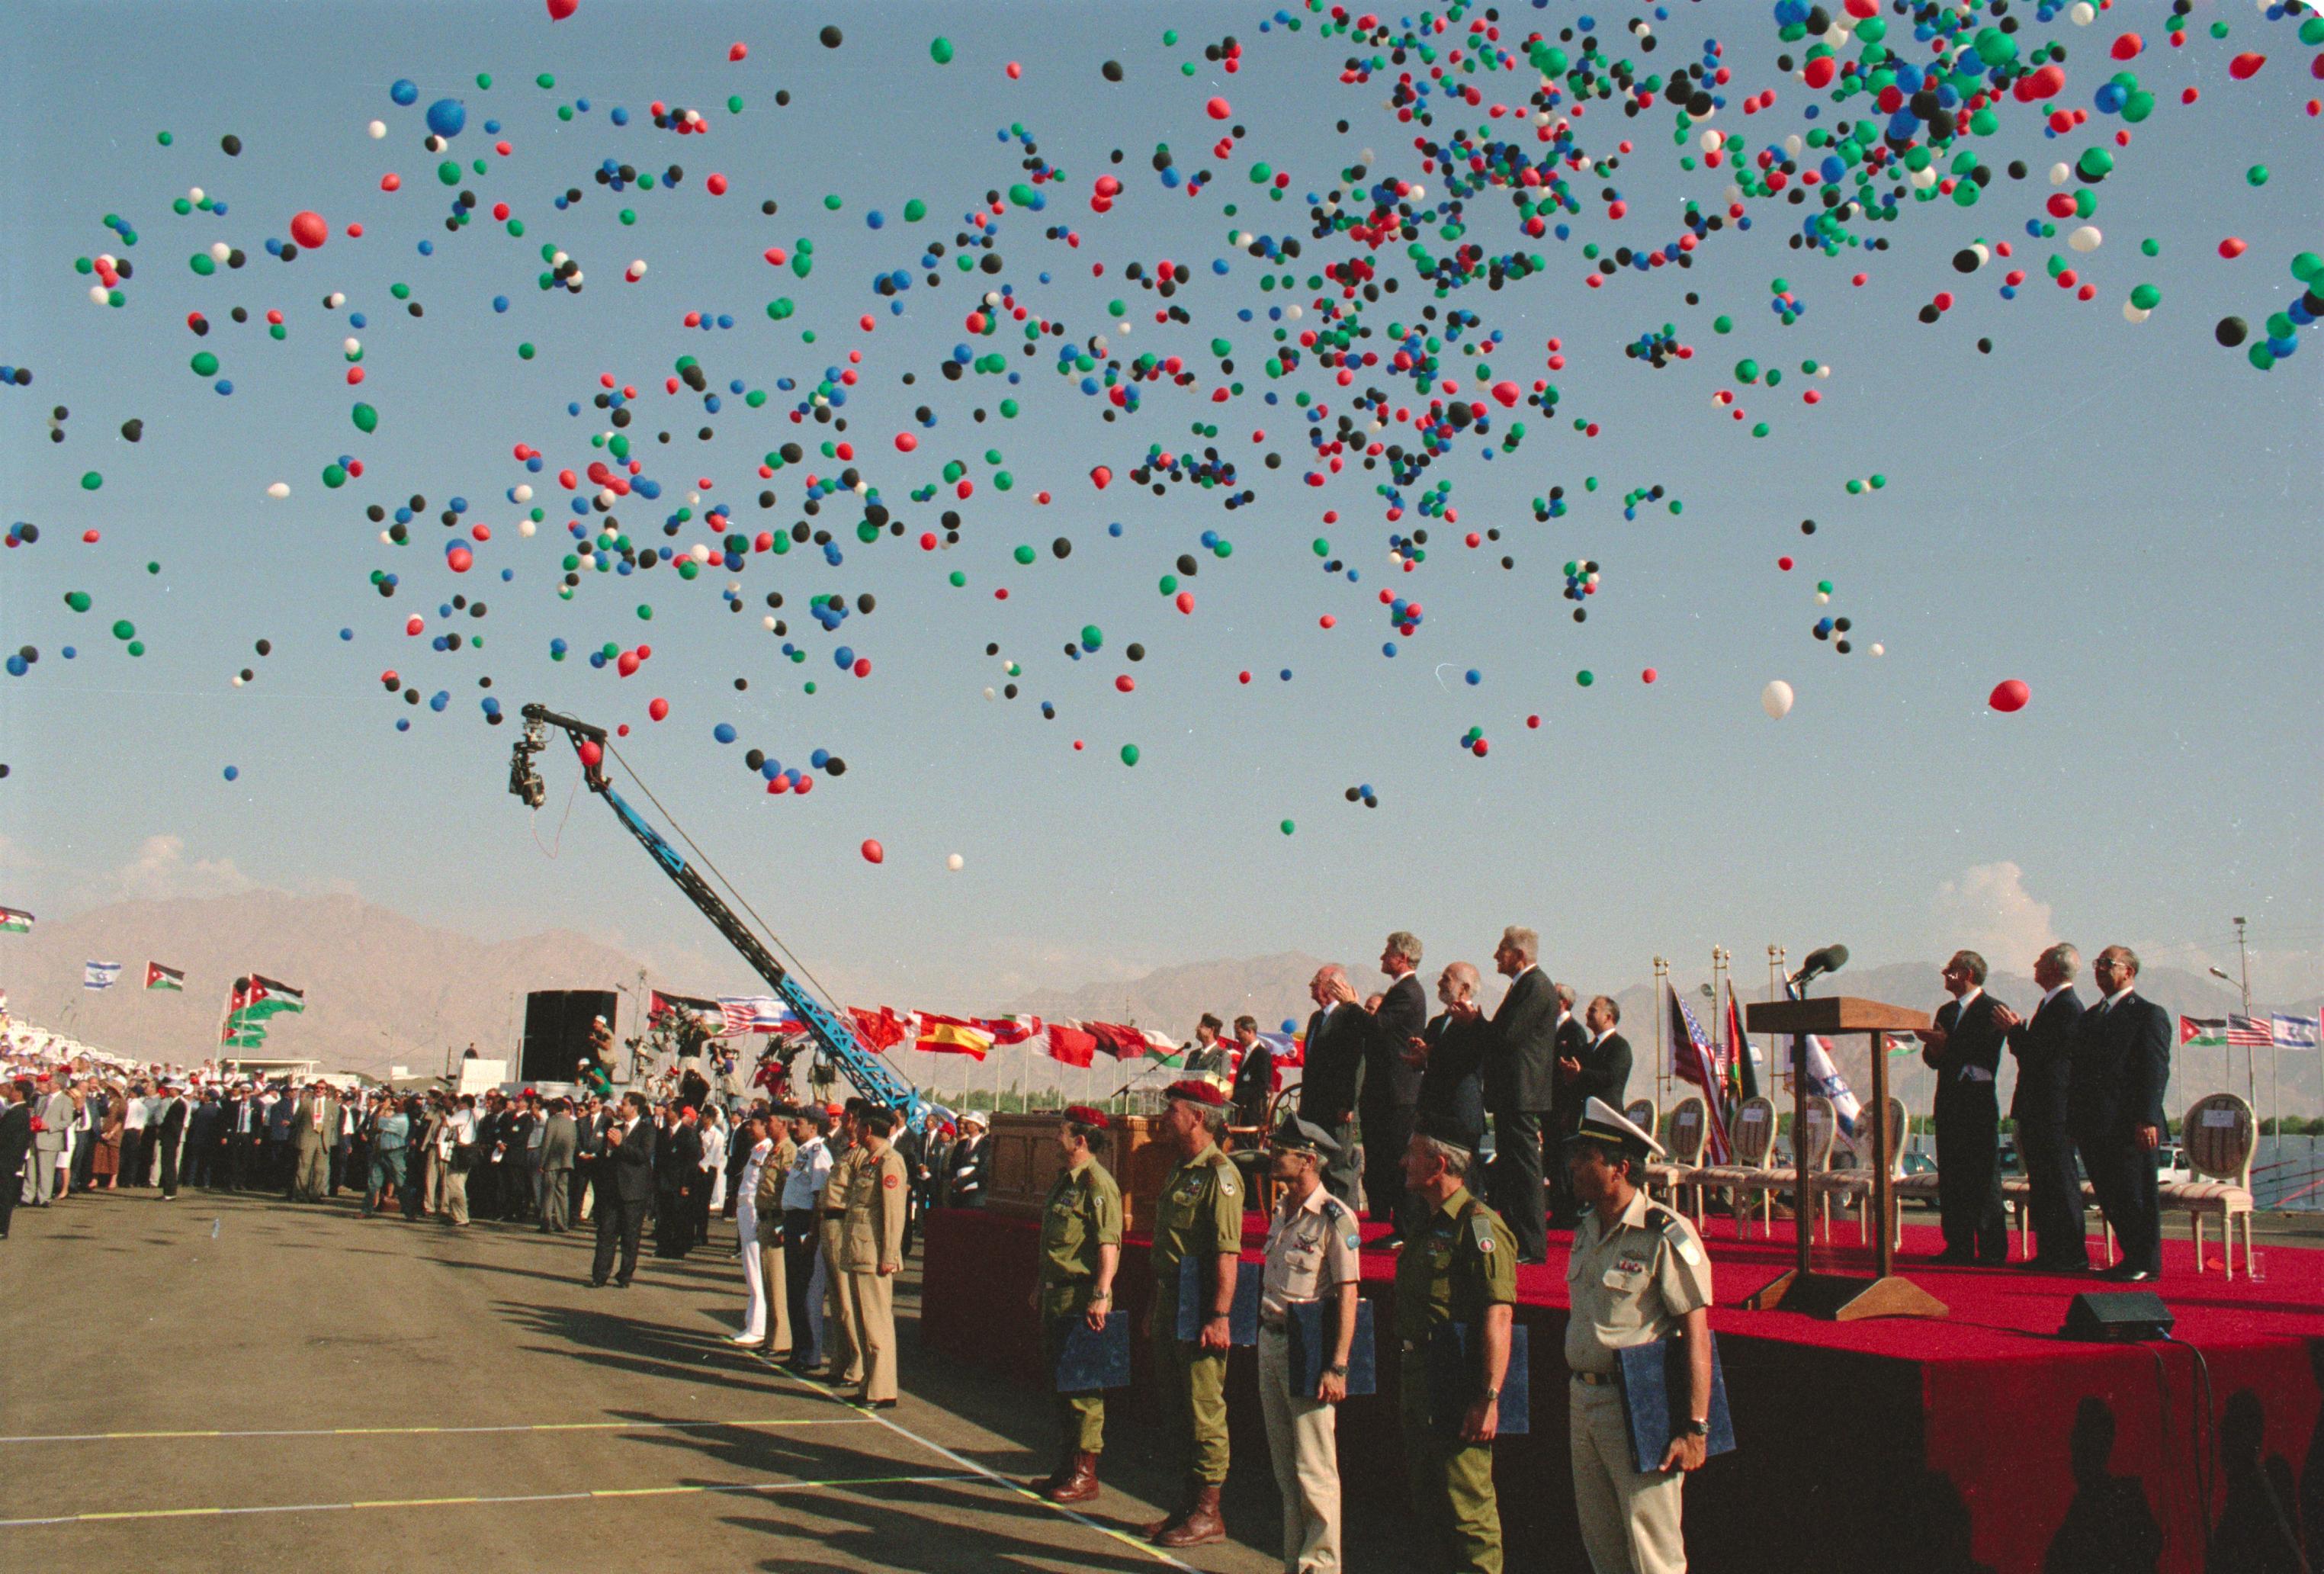 Flickr_-_Government_Press_Office_%28GPO%29_-_Balloons_released_into_the_air_during_the_Israel-Jordan_Peace_Treaty.jpg